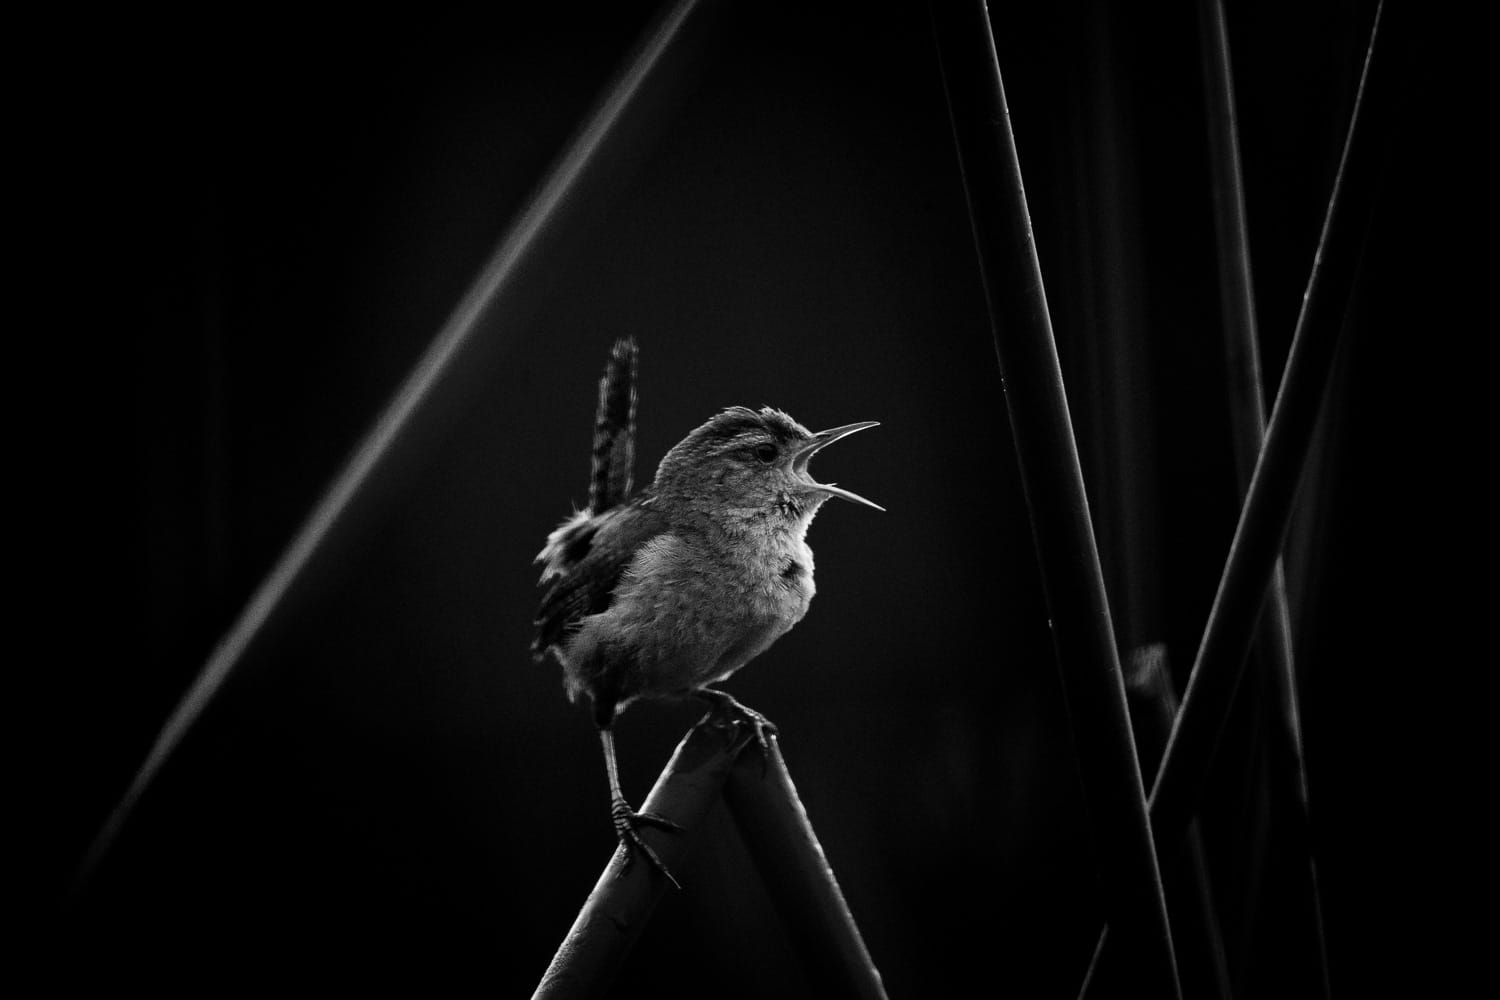 A bird perched on a branch, singing or calling, captured in a black and white photograph.